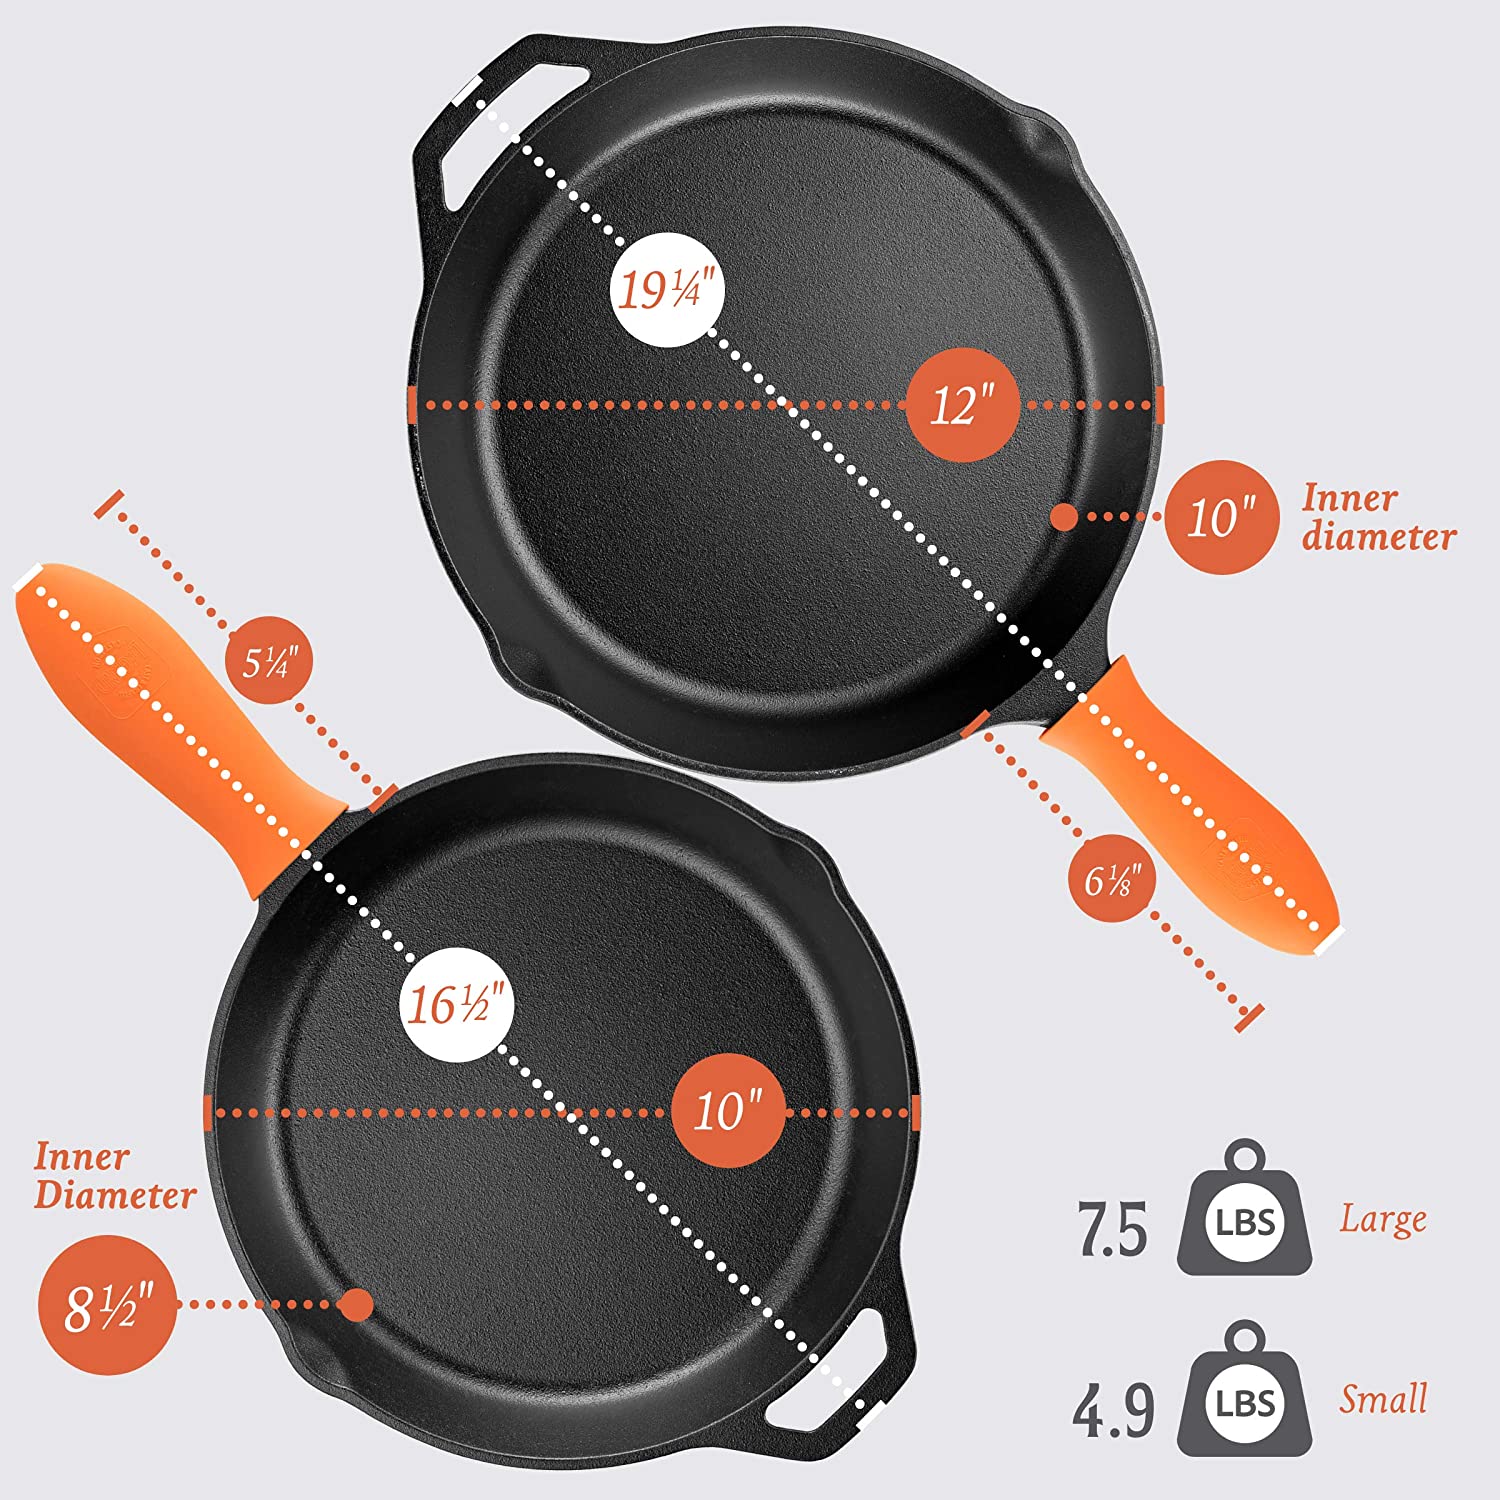 Legend Cookware Cast Iron series - Fonts In Use